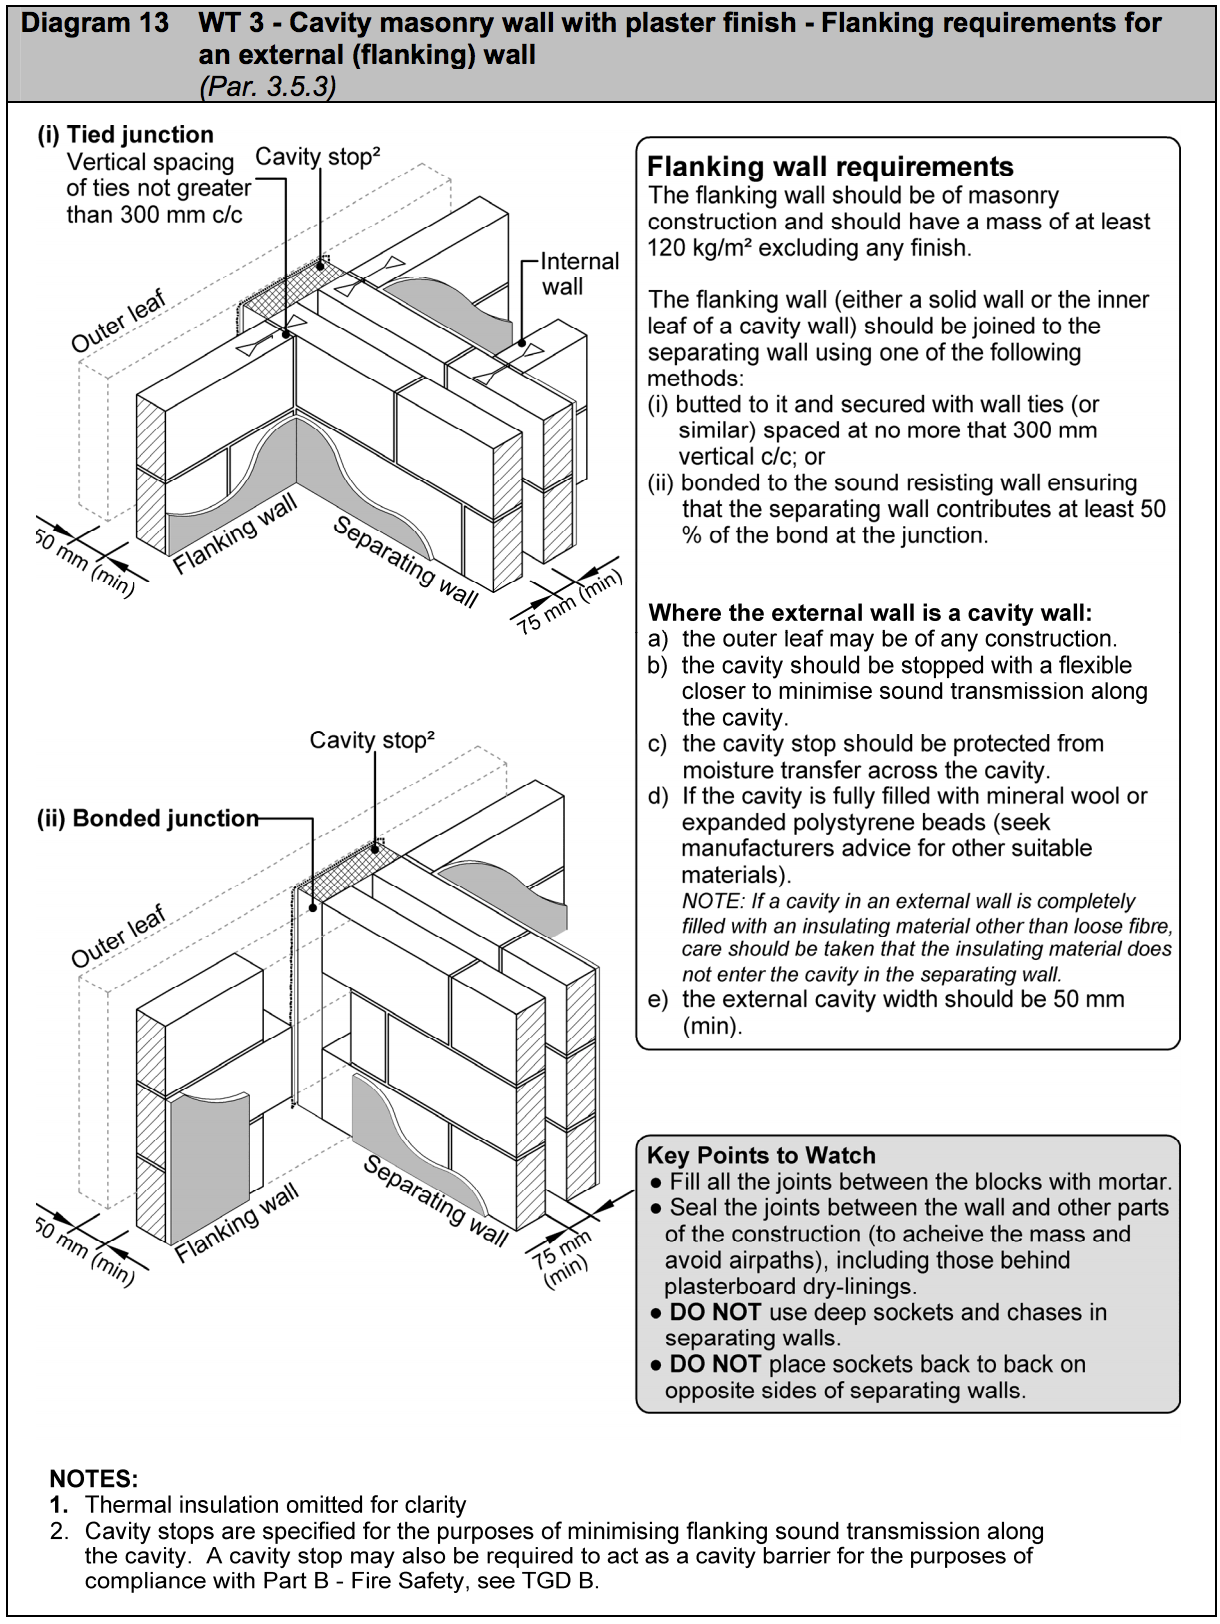 Diagram HE13 - WT 3 Cavity masonry with plaster finish - flanking requirements for an external (flanking) wall - Extract from TGD E